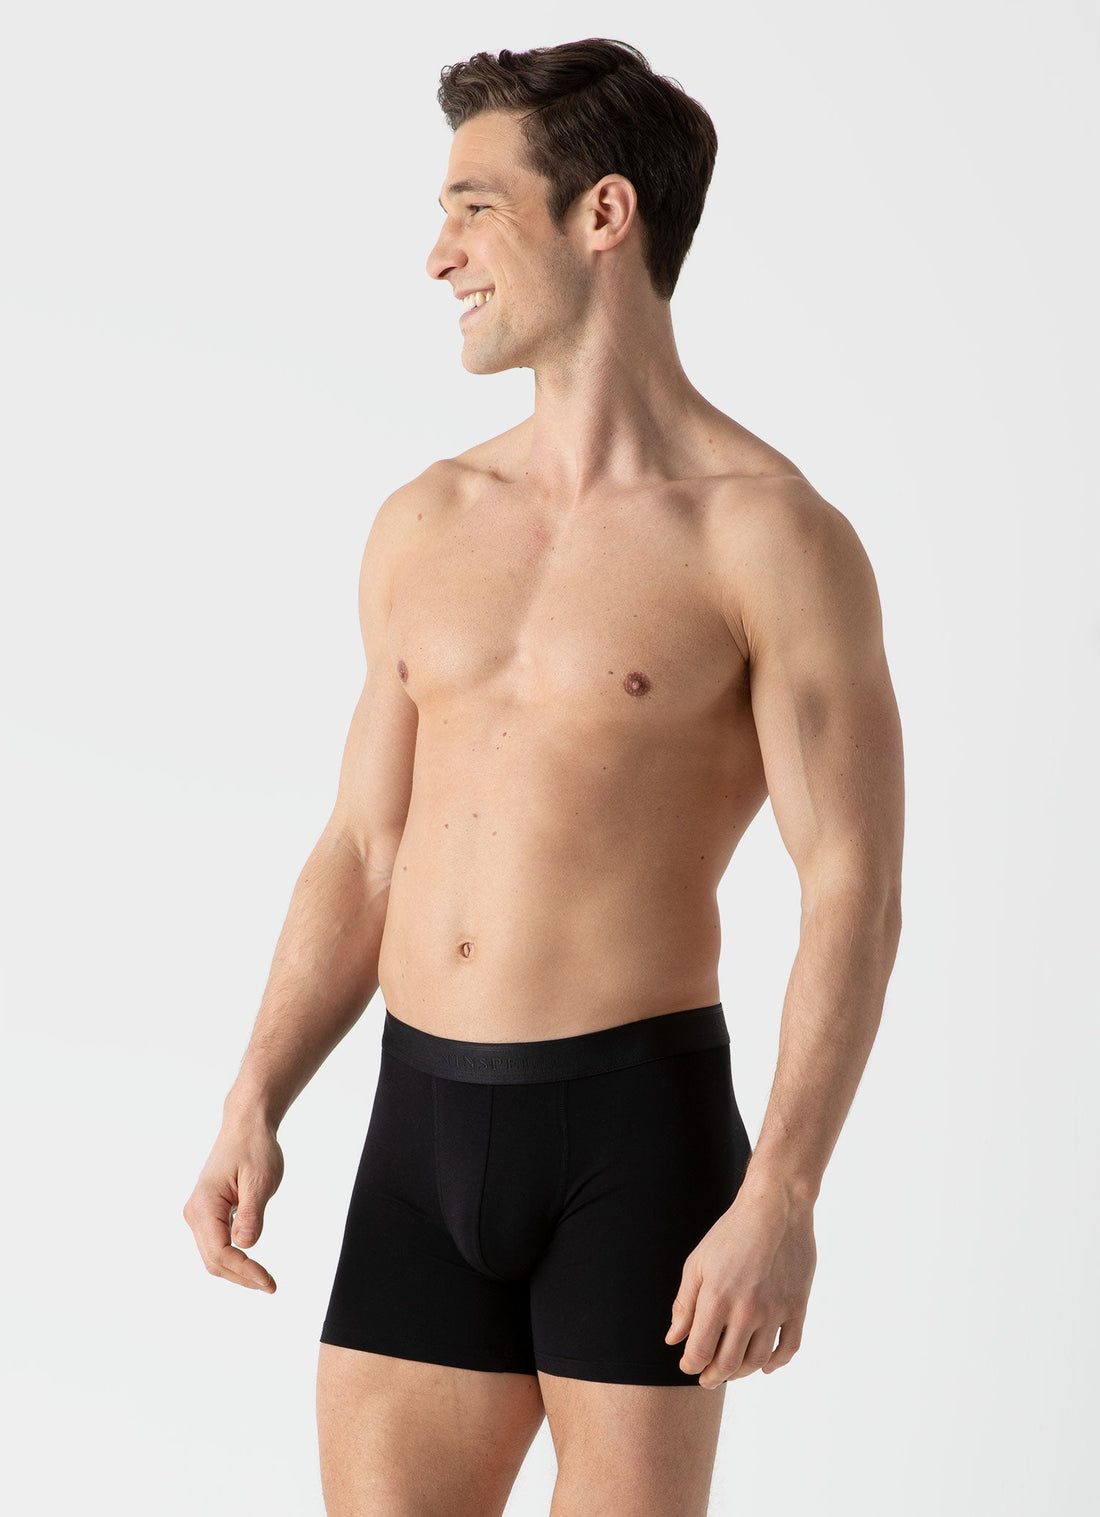 Premium Quality Italian Men's COTTON Briefs Without Fly. Proudly MADE in  ITALY. Full-coverage.breathable and Thin. Black, Grey, Navy & White -   Canada